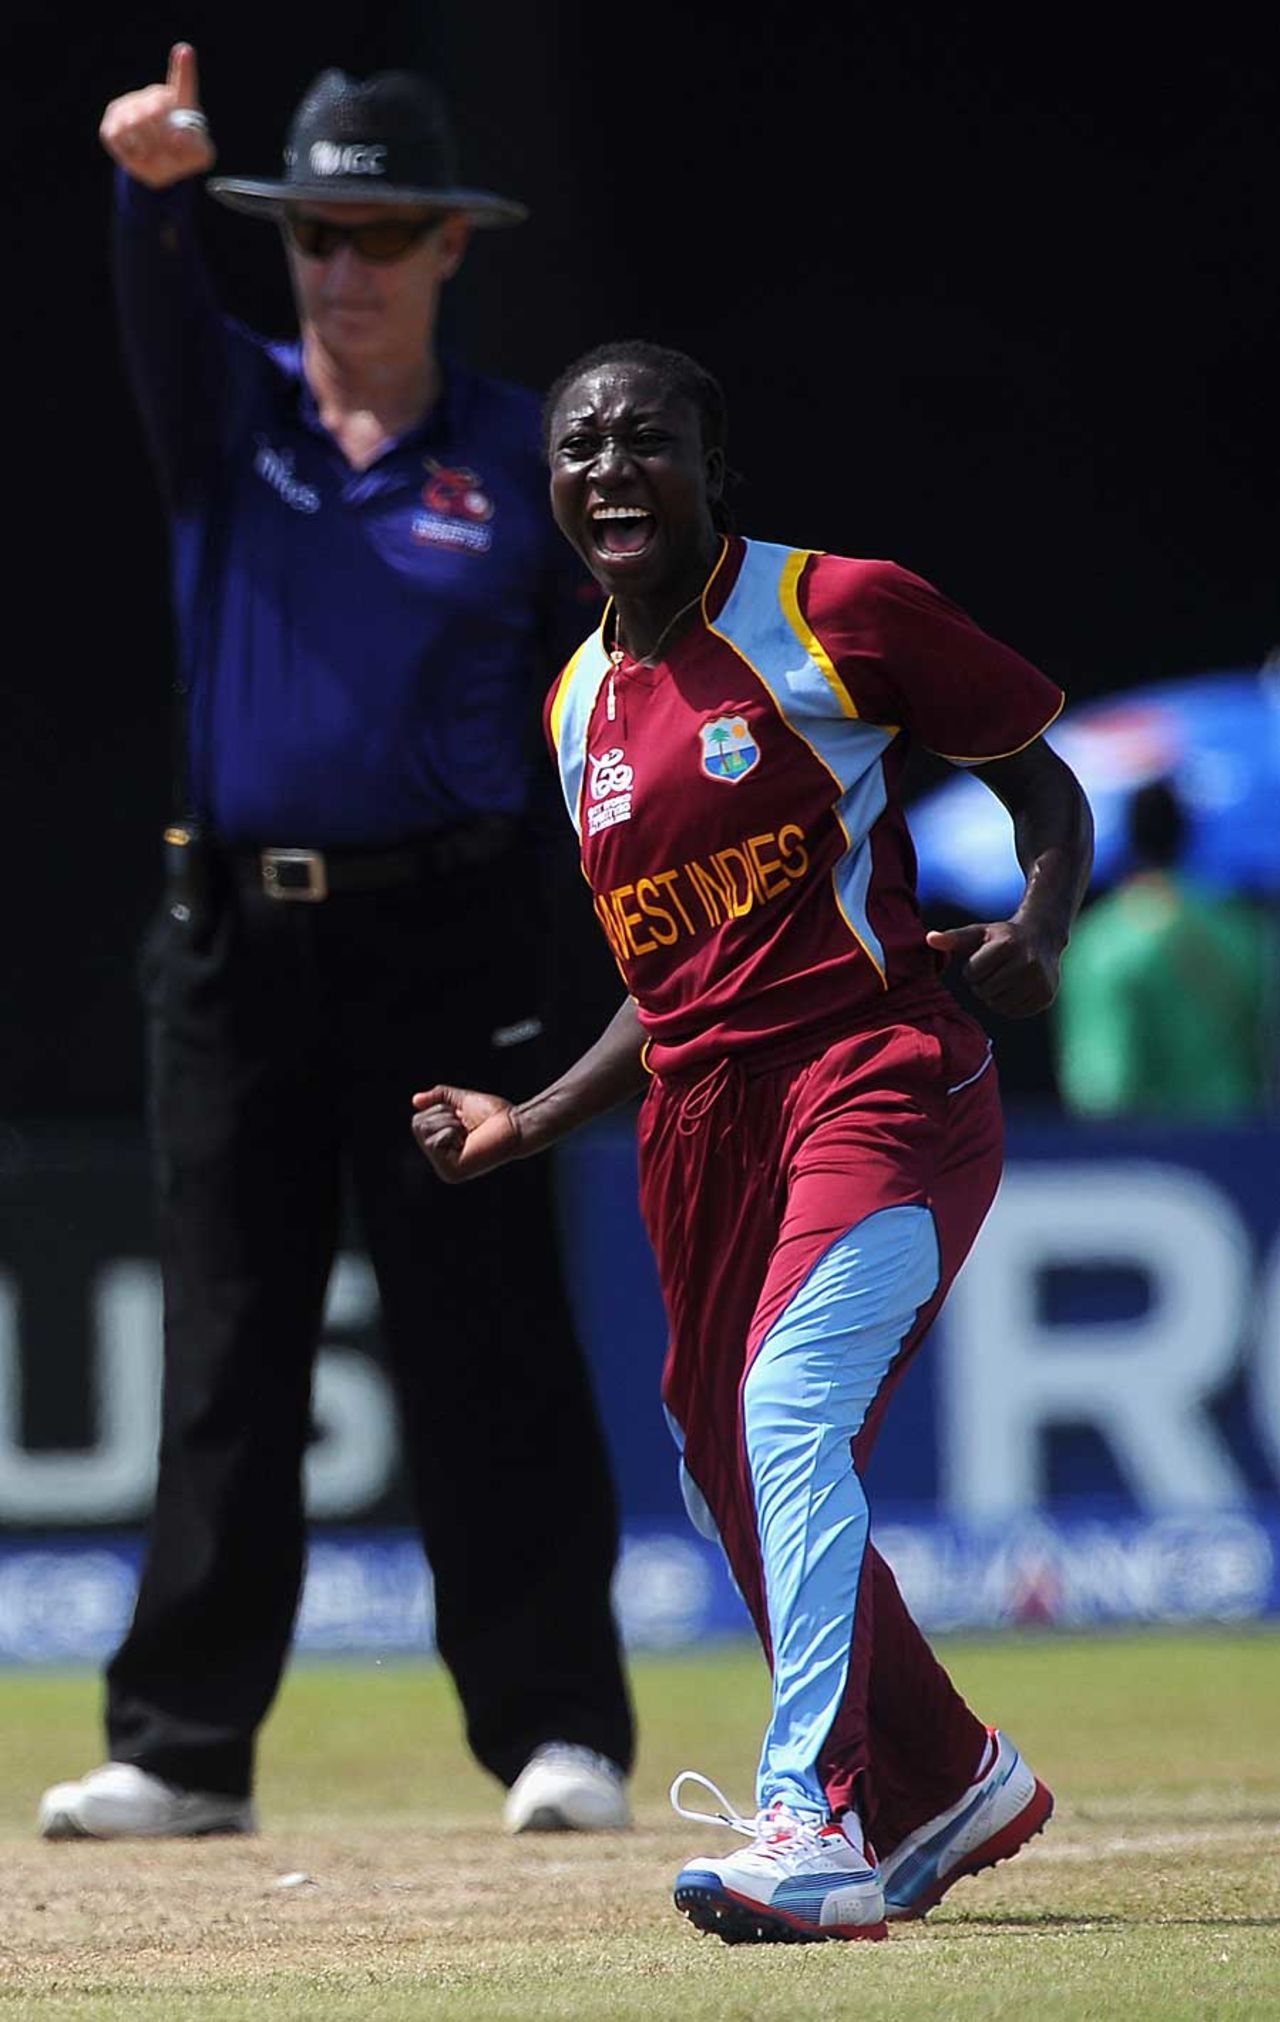 Stafanie Taylor picked up three wickets in West Indies' clinical win, South Africa v West Indies, Group B, Women's World Twenty20, September 30, 2012